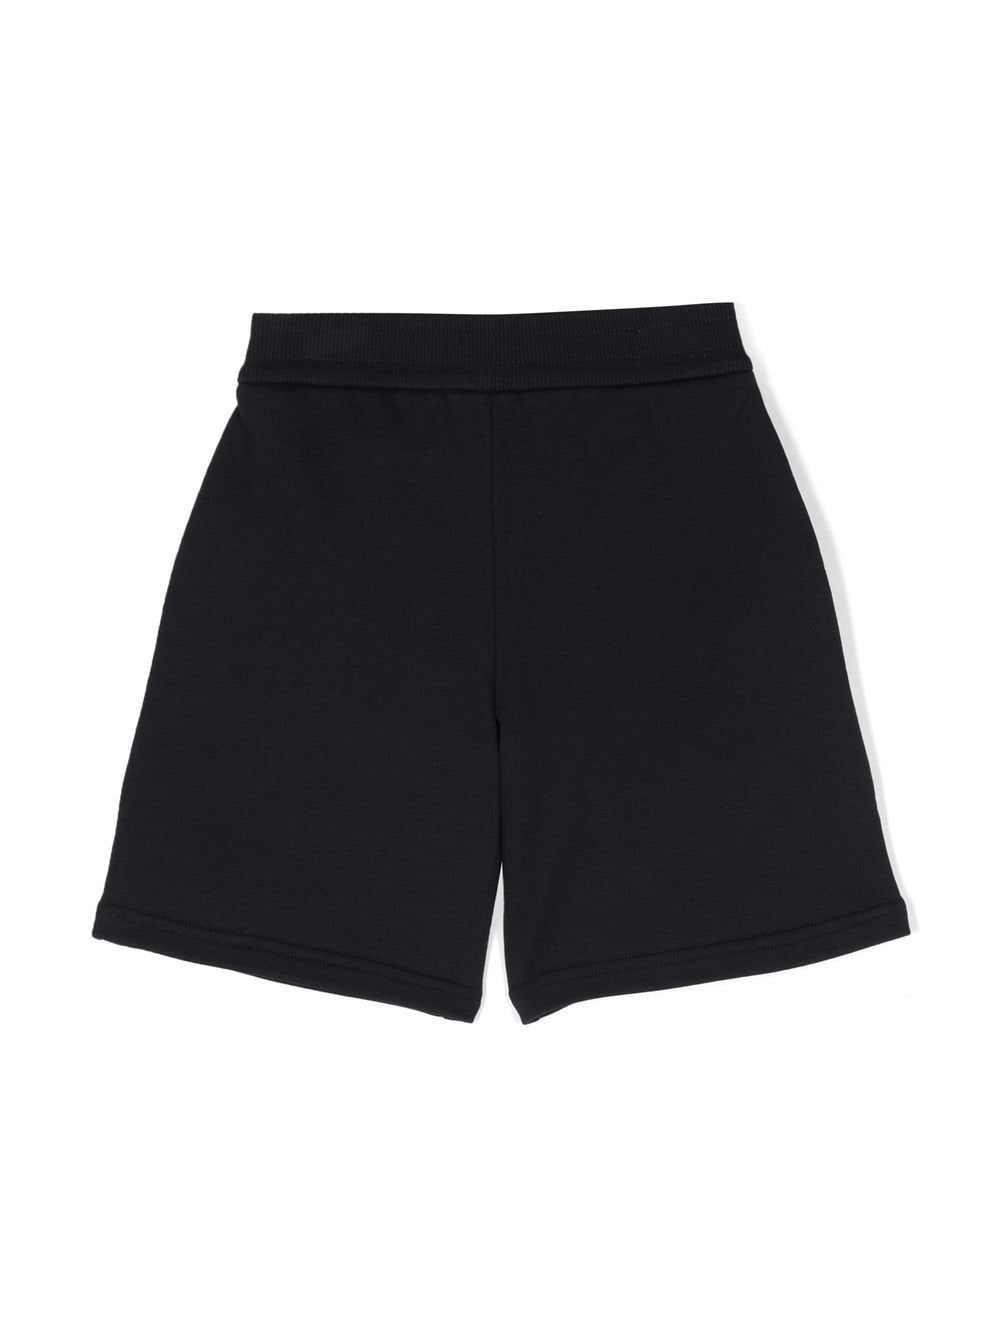 Blue shorts for boys with logo